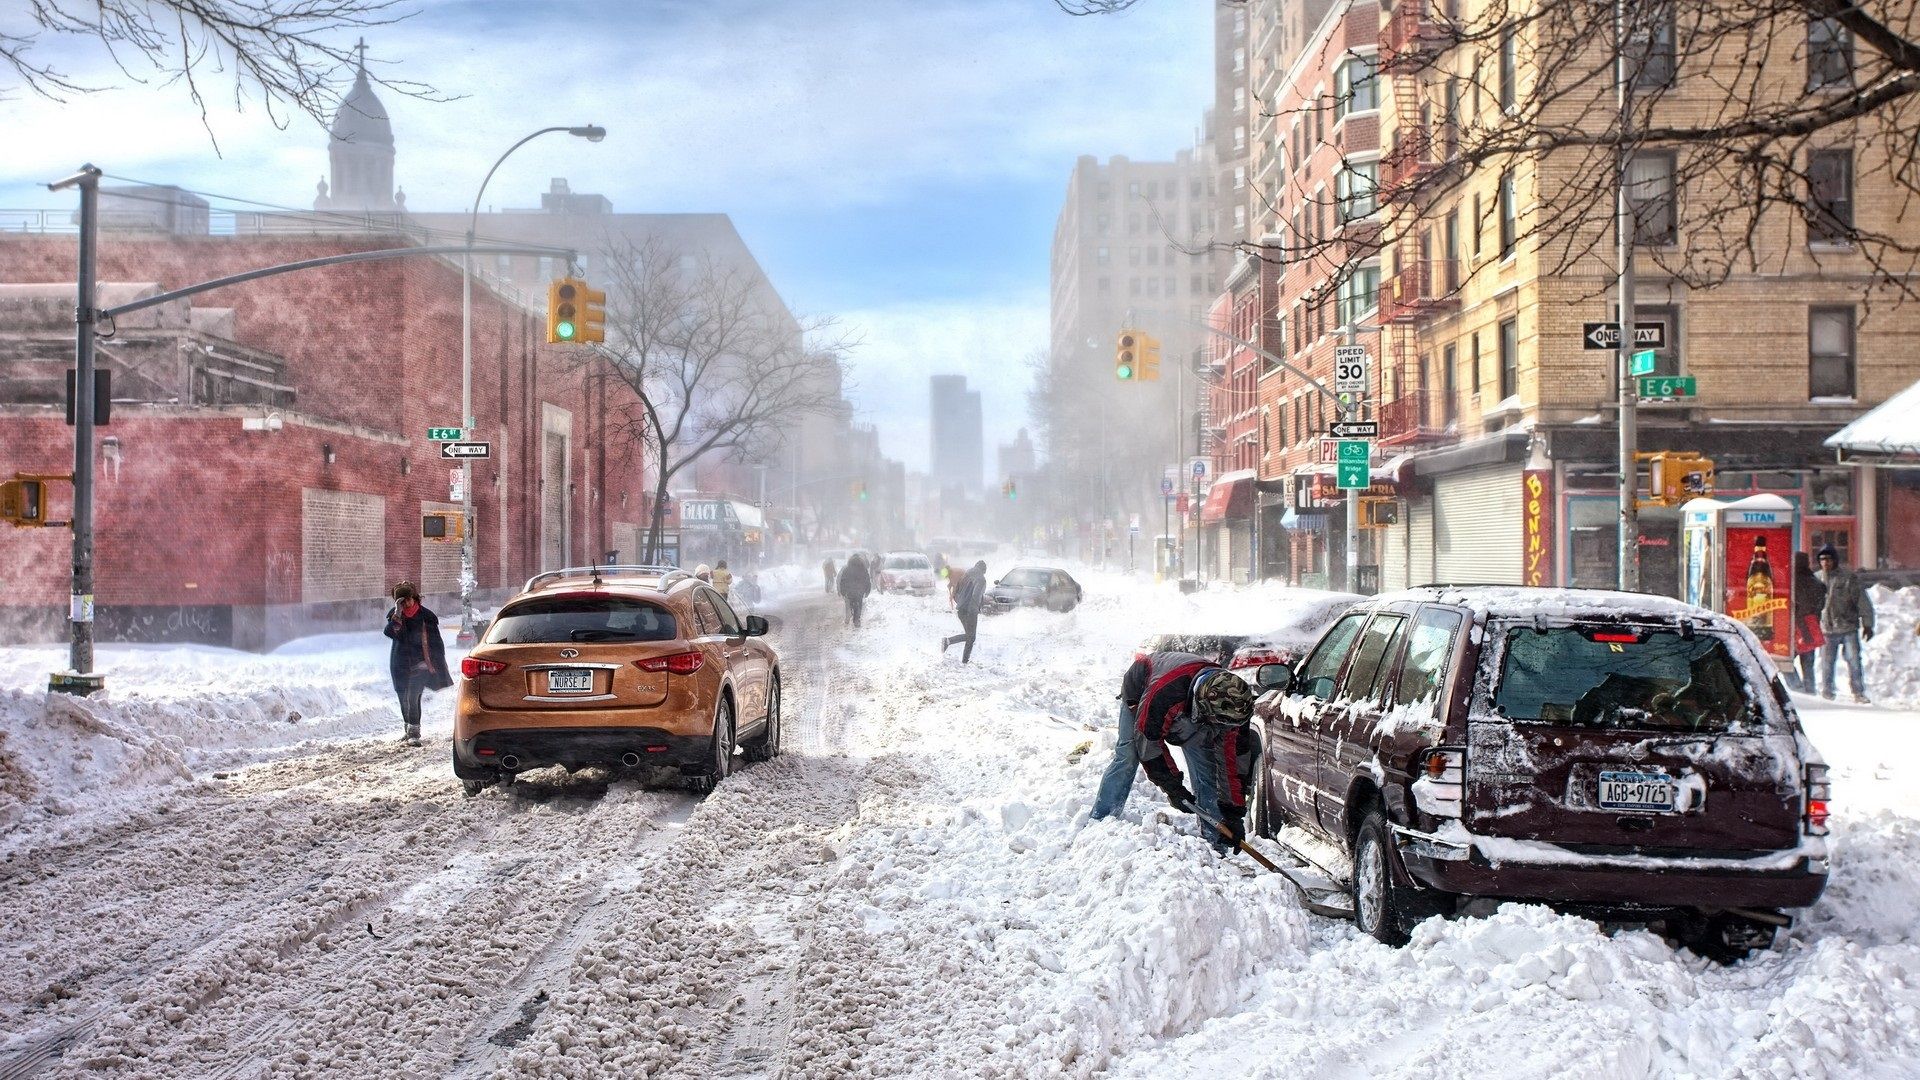 Wallpaper New York, winter, thick snow, road, city, cars, buildings, cold, USA 1920x1080 Full HD 2K Picture, Image